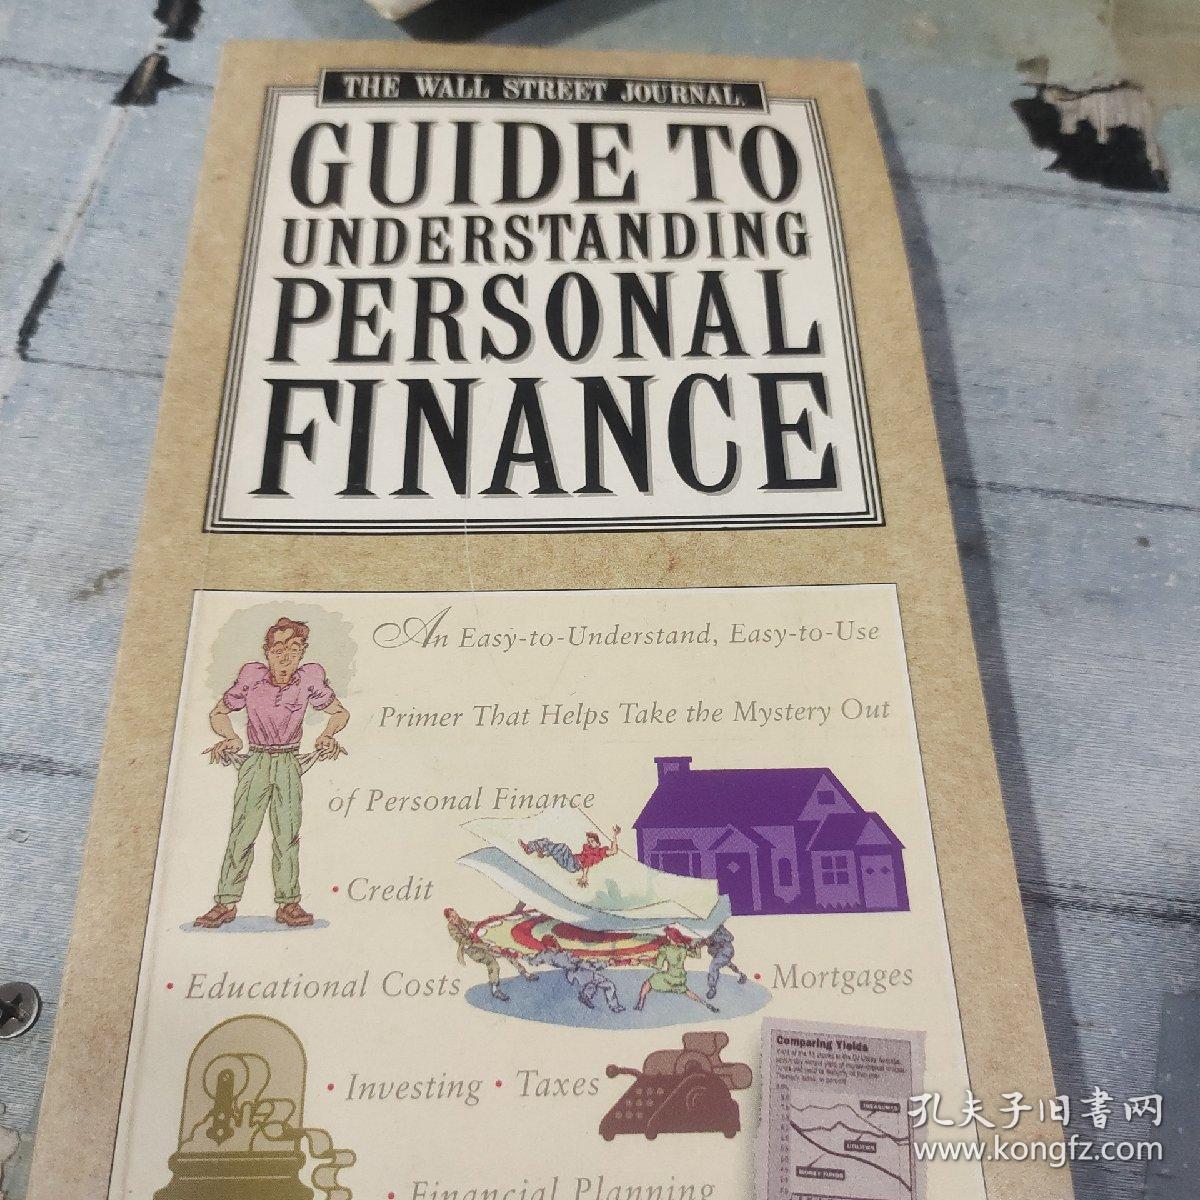 THE WALL STREET JOURNAL
GUIDE TO
UNDERSTANDING
PERSONAL FINANCE